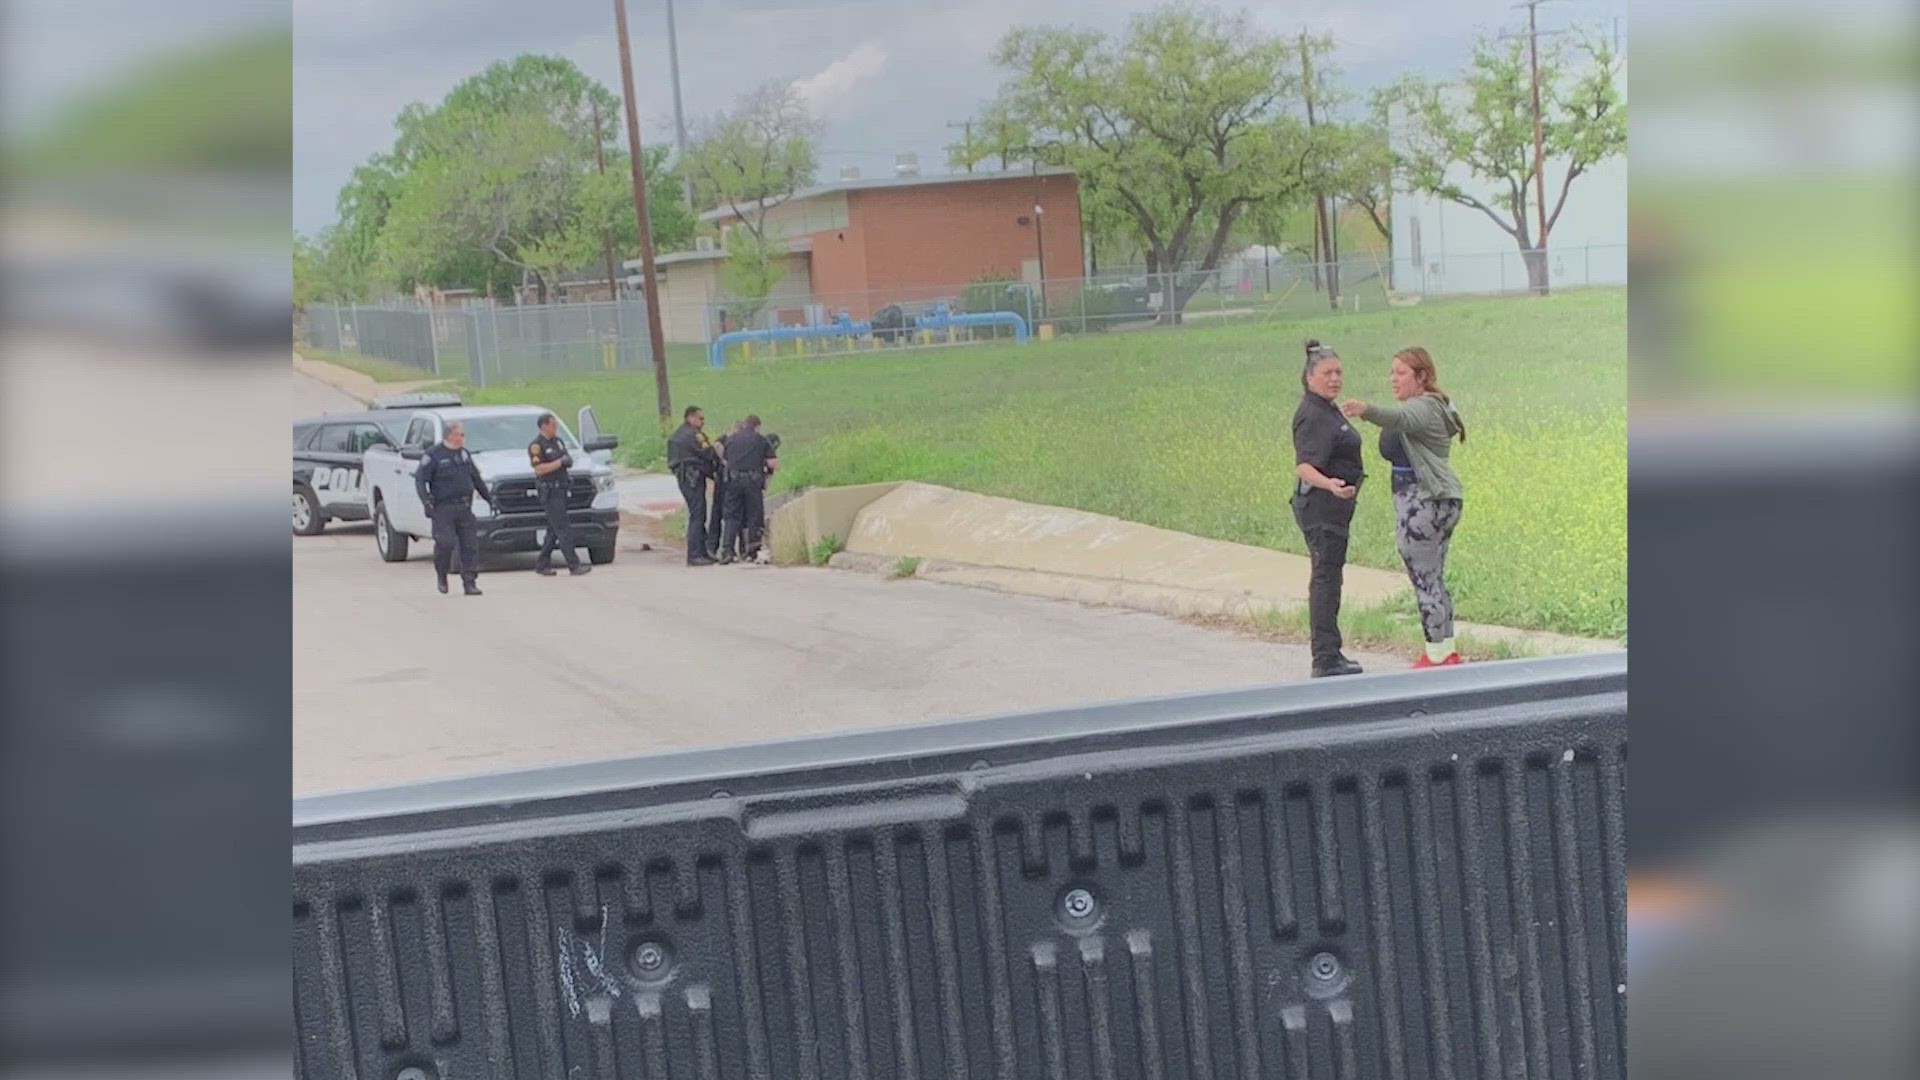 A district spokesperson said school police officers arrived in less than a minute to Roosevelt Elementary and arrested the suspect.